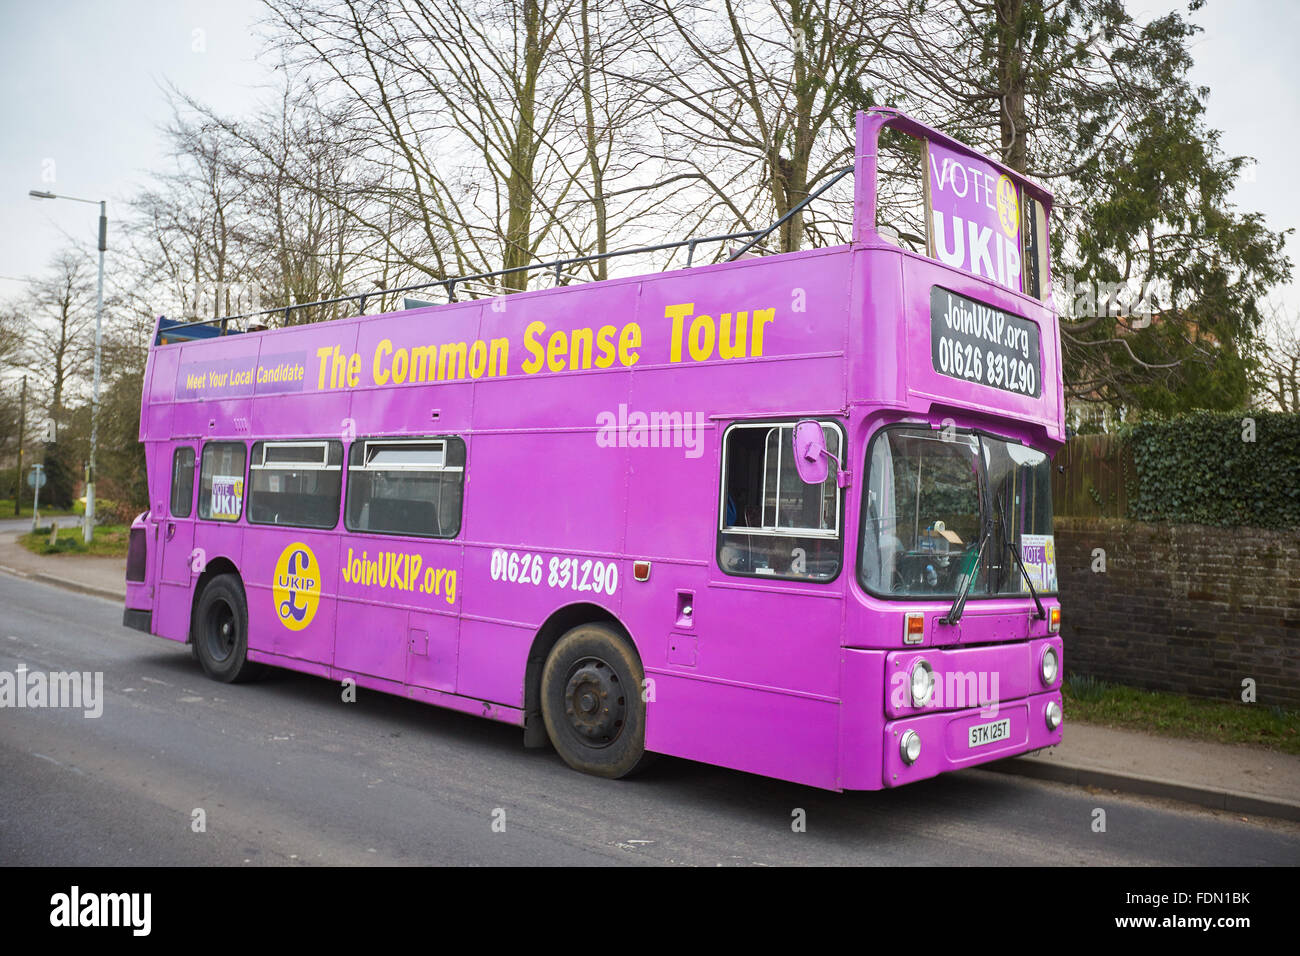 The UKIP Common Sense tour bus parked in front of the UKIP campaign headquarters in Weston Turville, near Aylesbury. Stock Photo